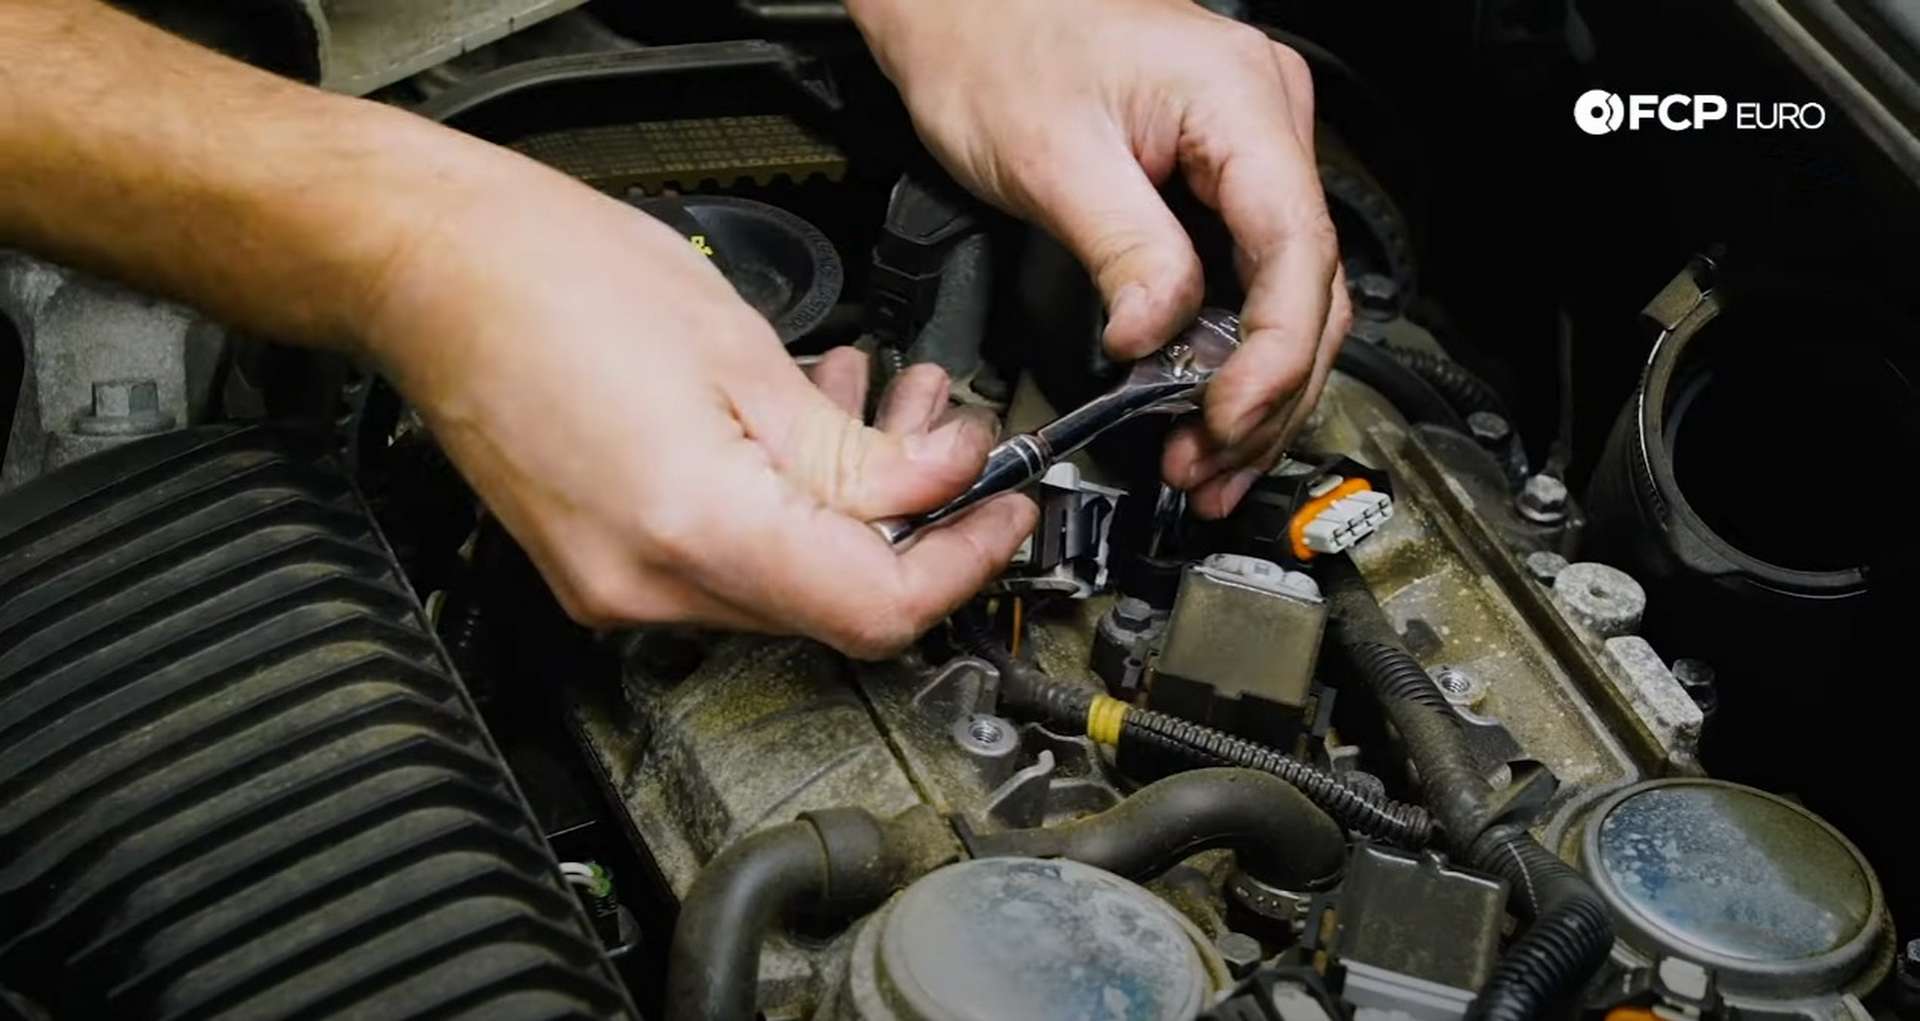 DIY Volvo Spark Plug and Ignition Coil Replacement removing the ignition coil mounting bolts